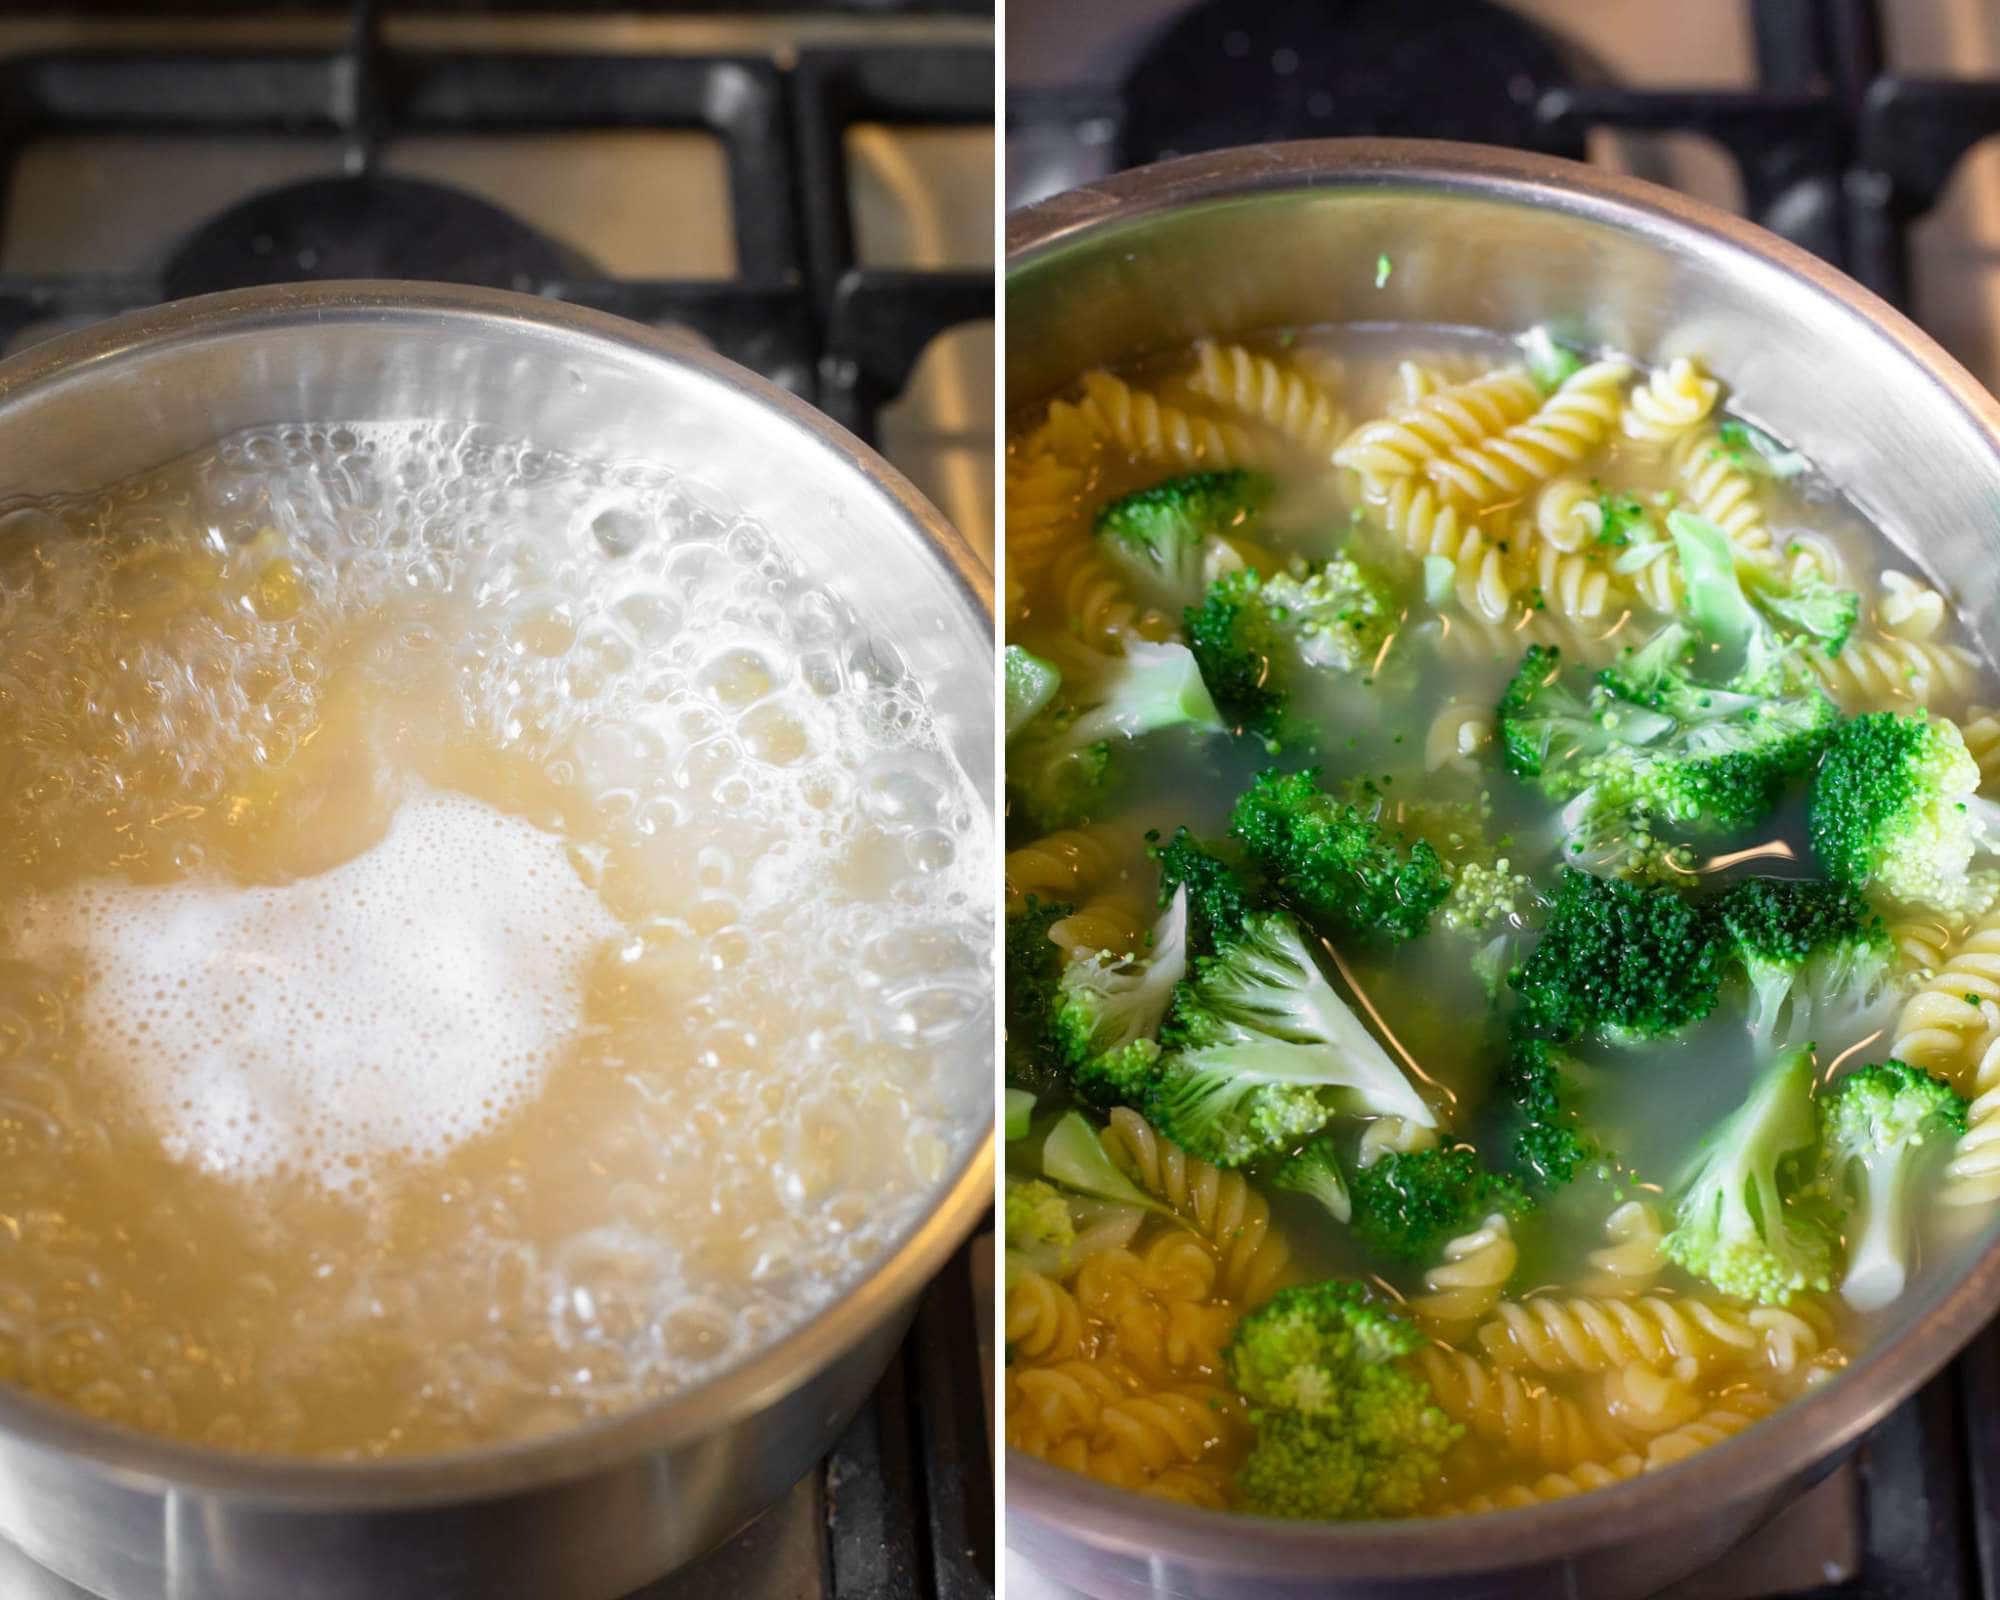 Rotini pasta cooking in boiling water with broccoli florets adding to pot.